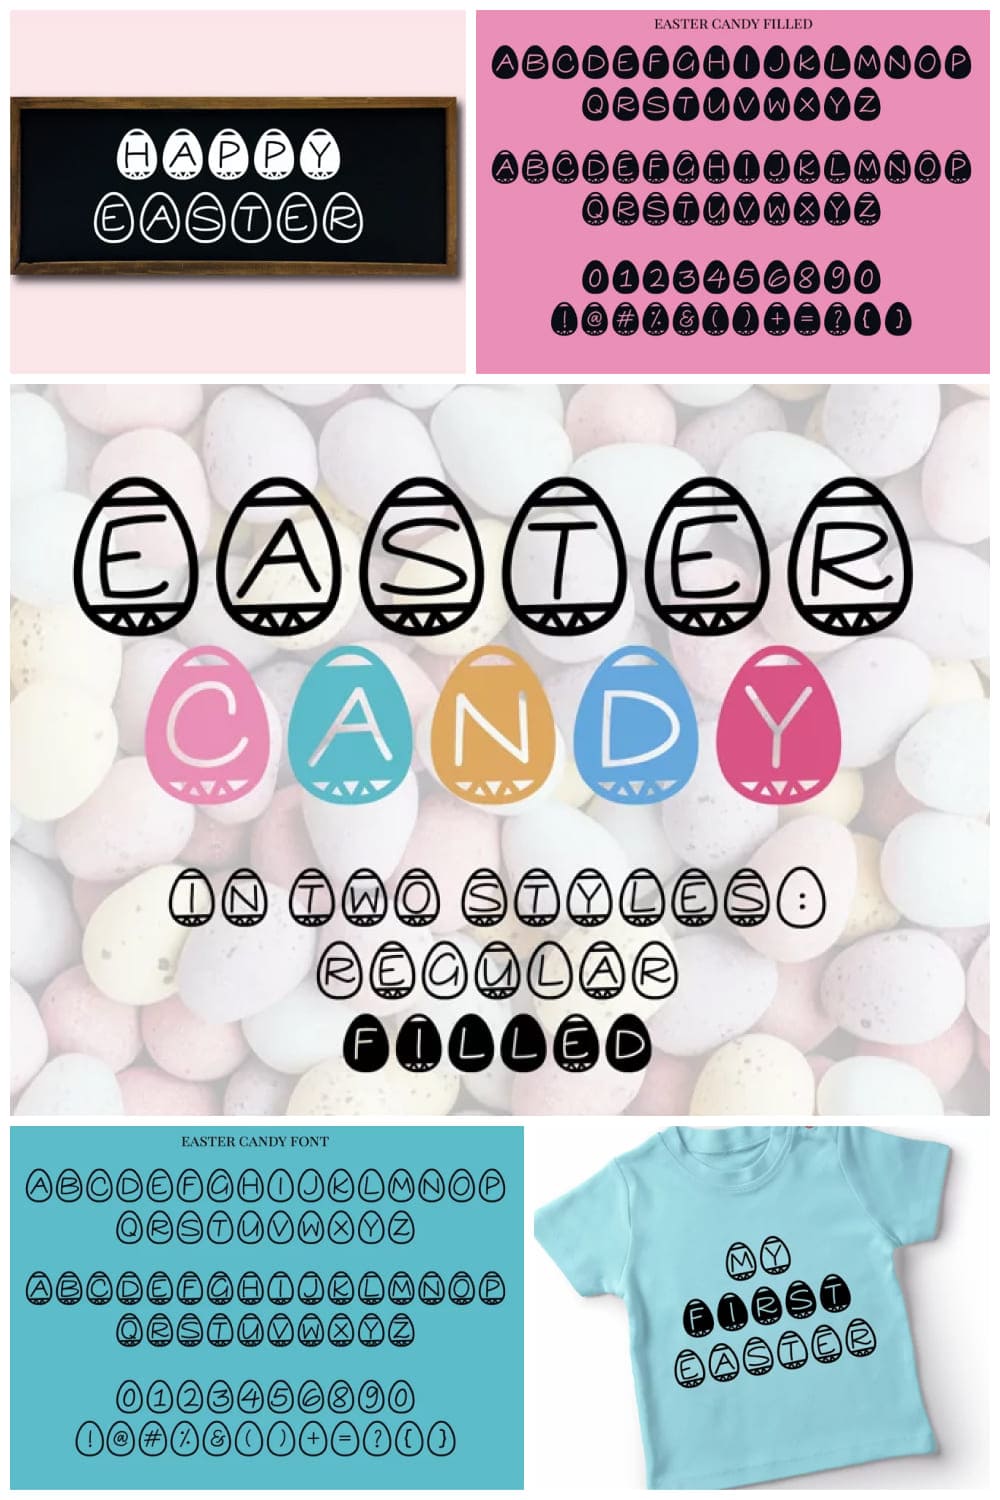 Font with colorful letters in eggs.